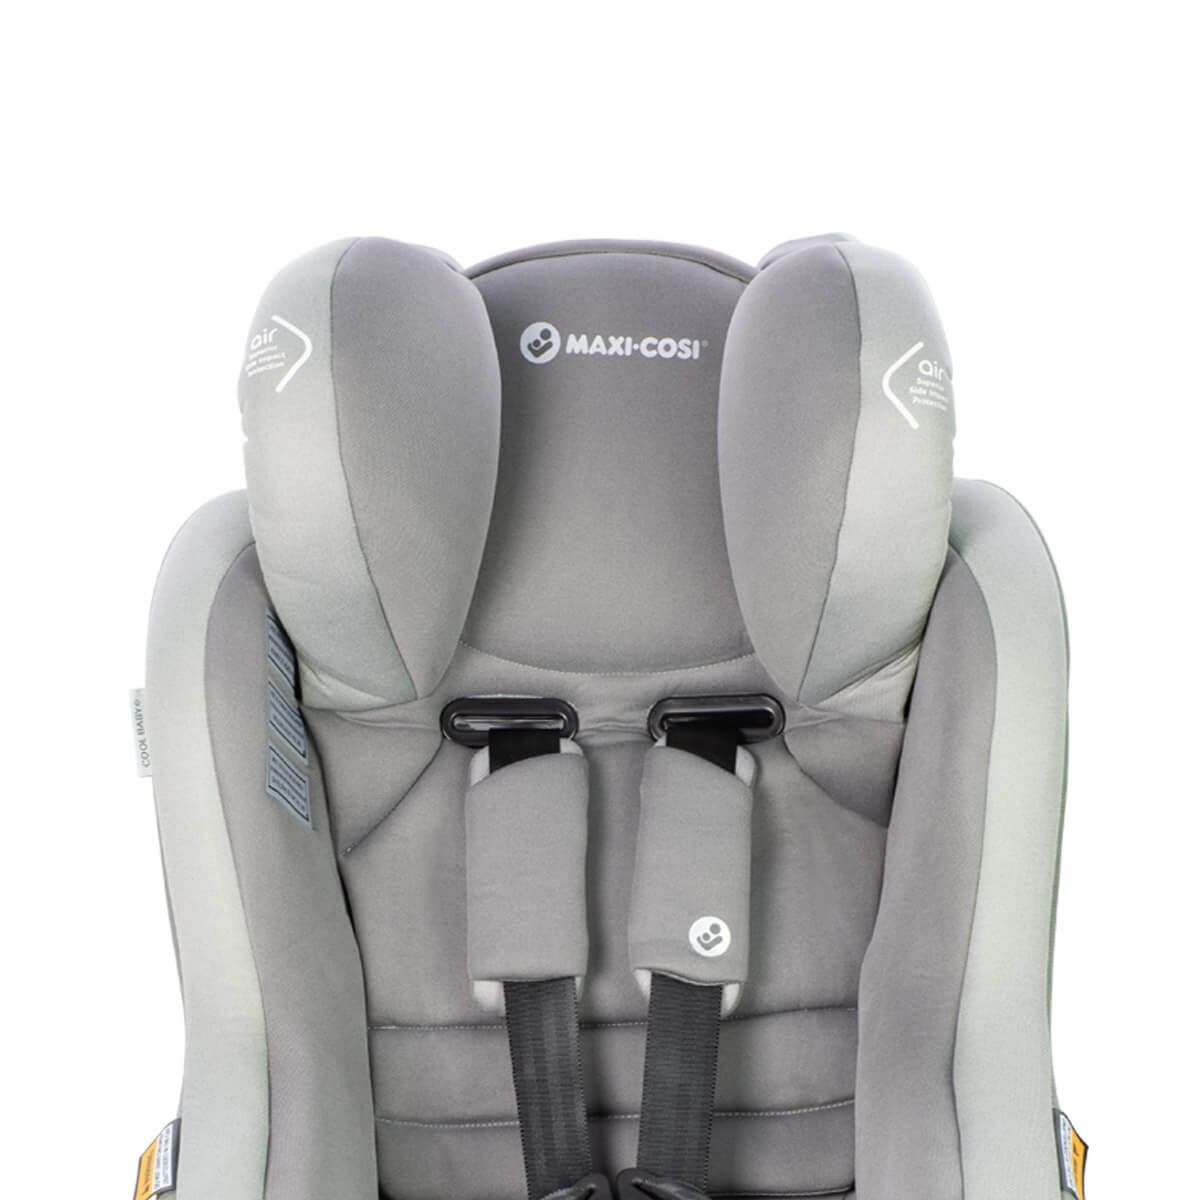 Maxi-Cosi Euro Nxt car seat with quickfit harness system